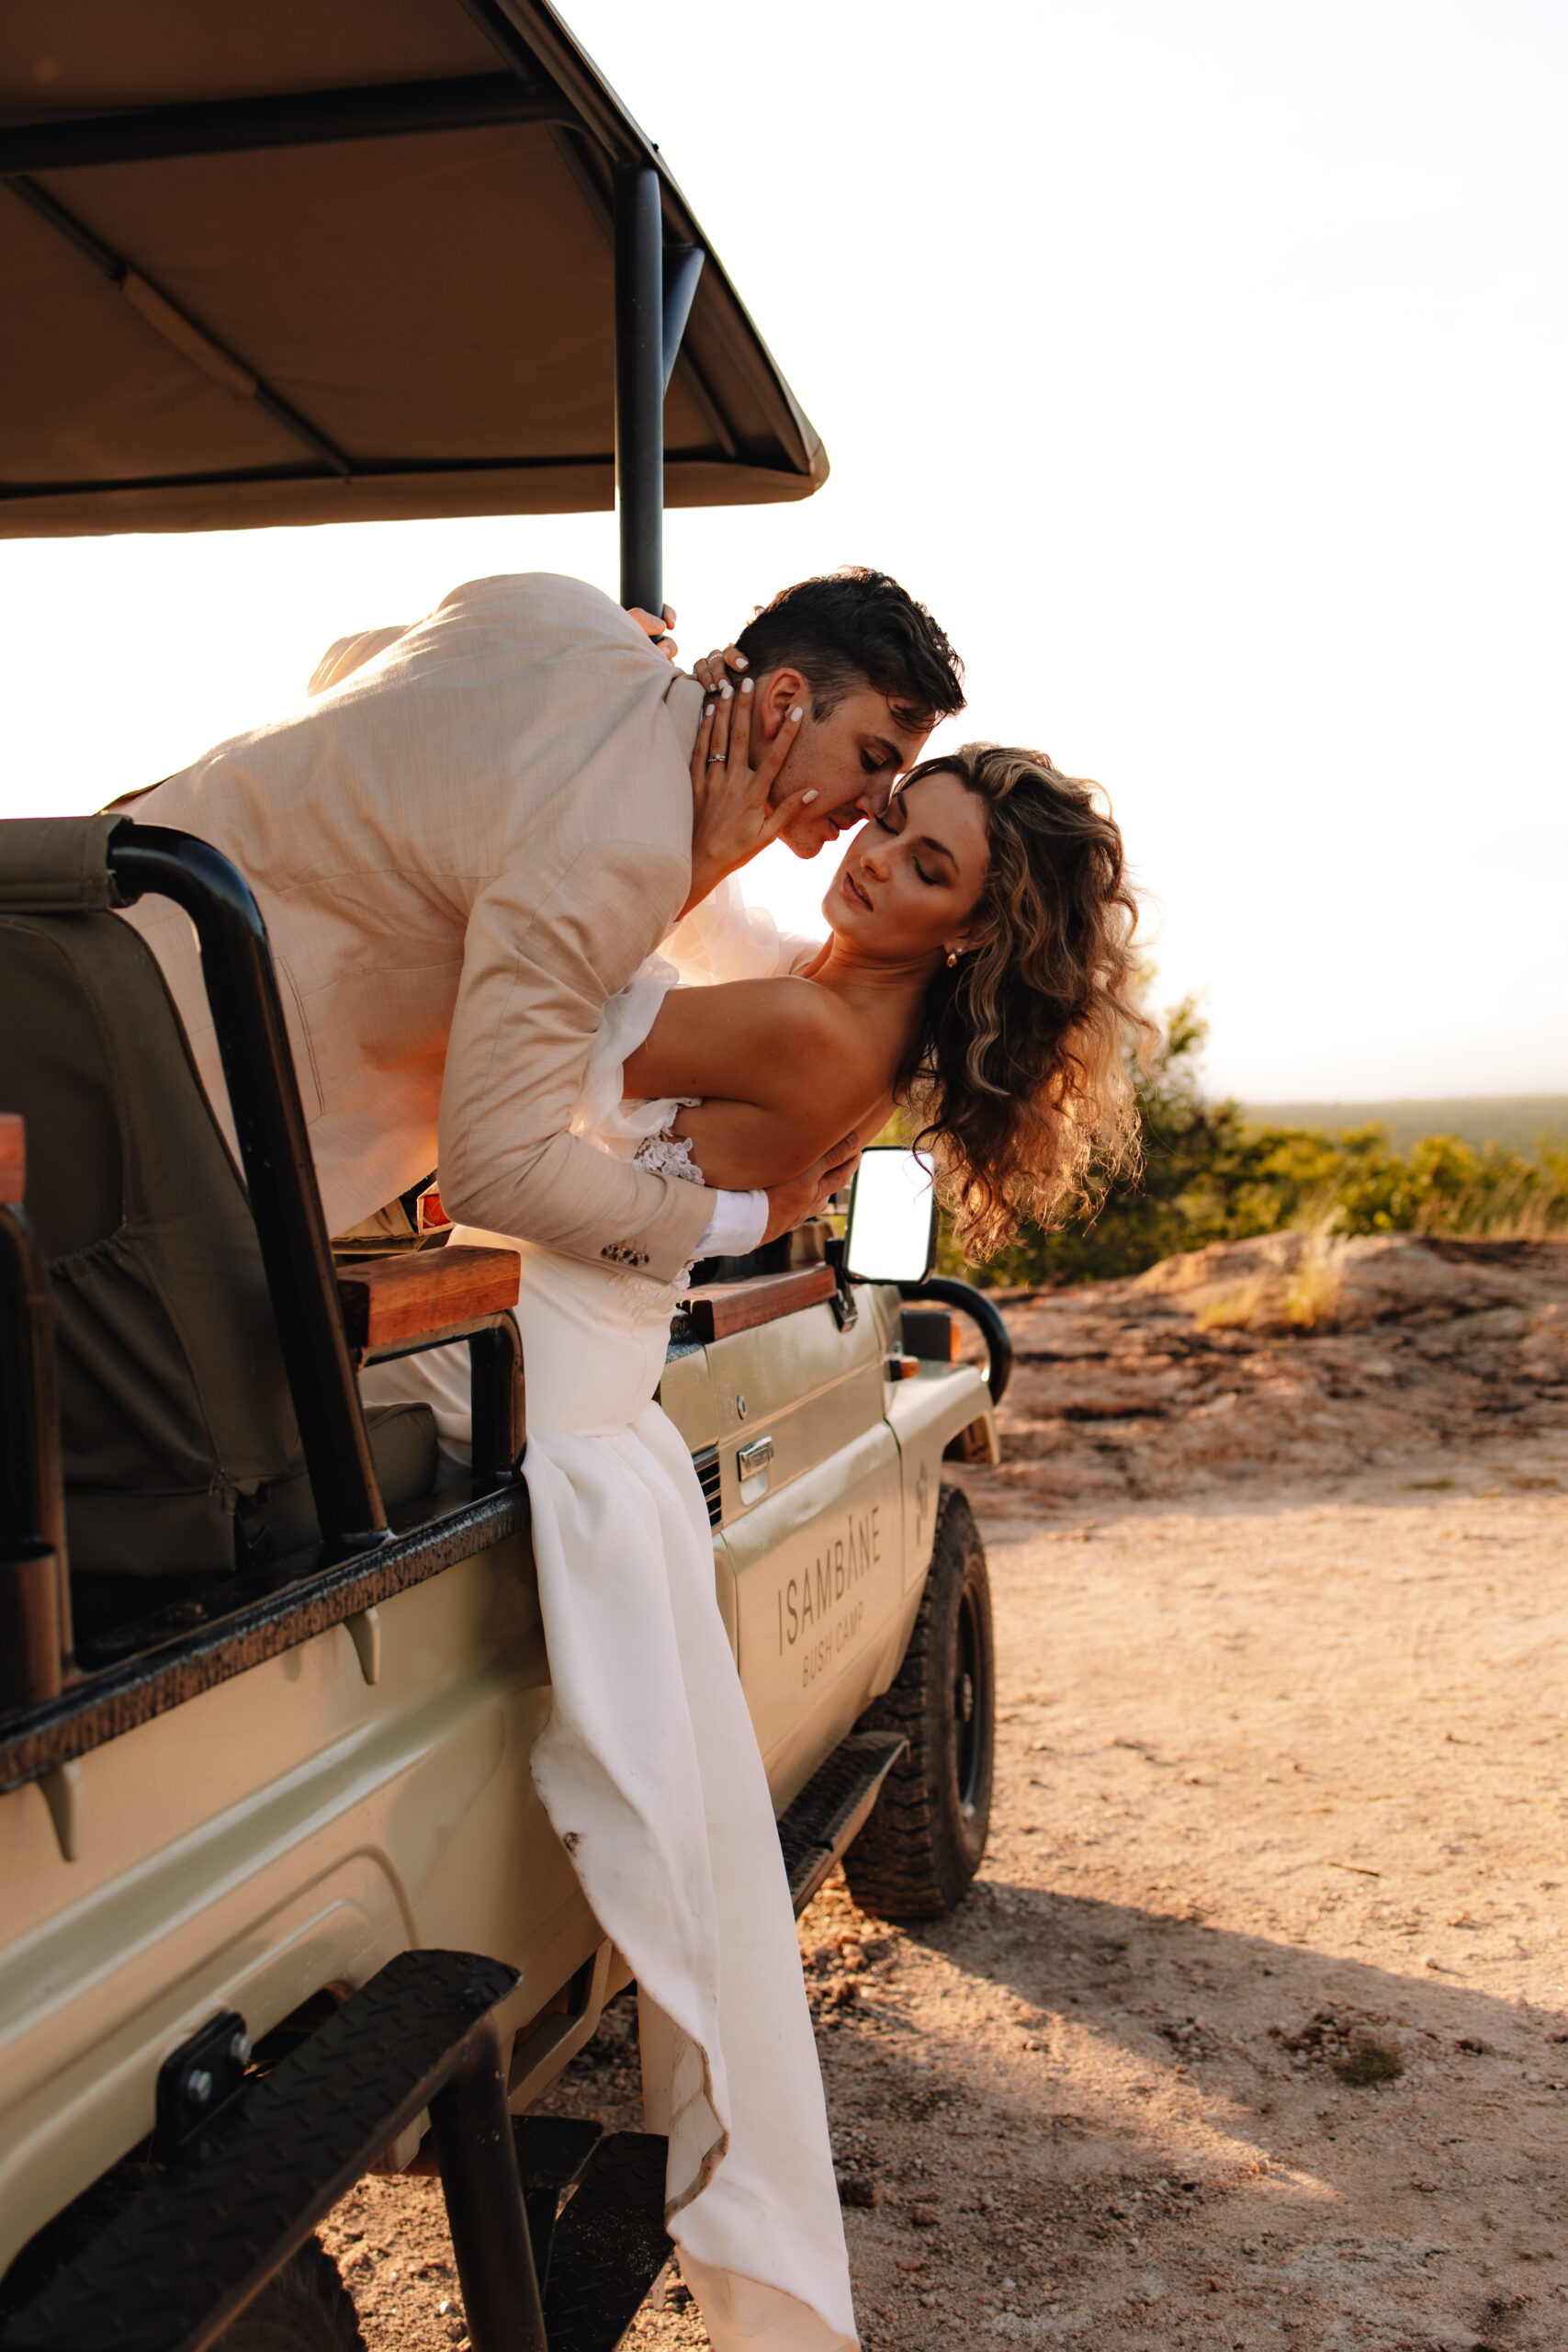 A groom kissing his bride as she leans out of the safari vehicle during sunrise